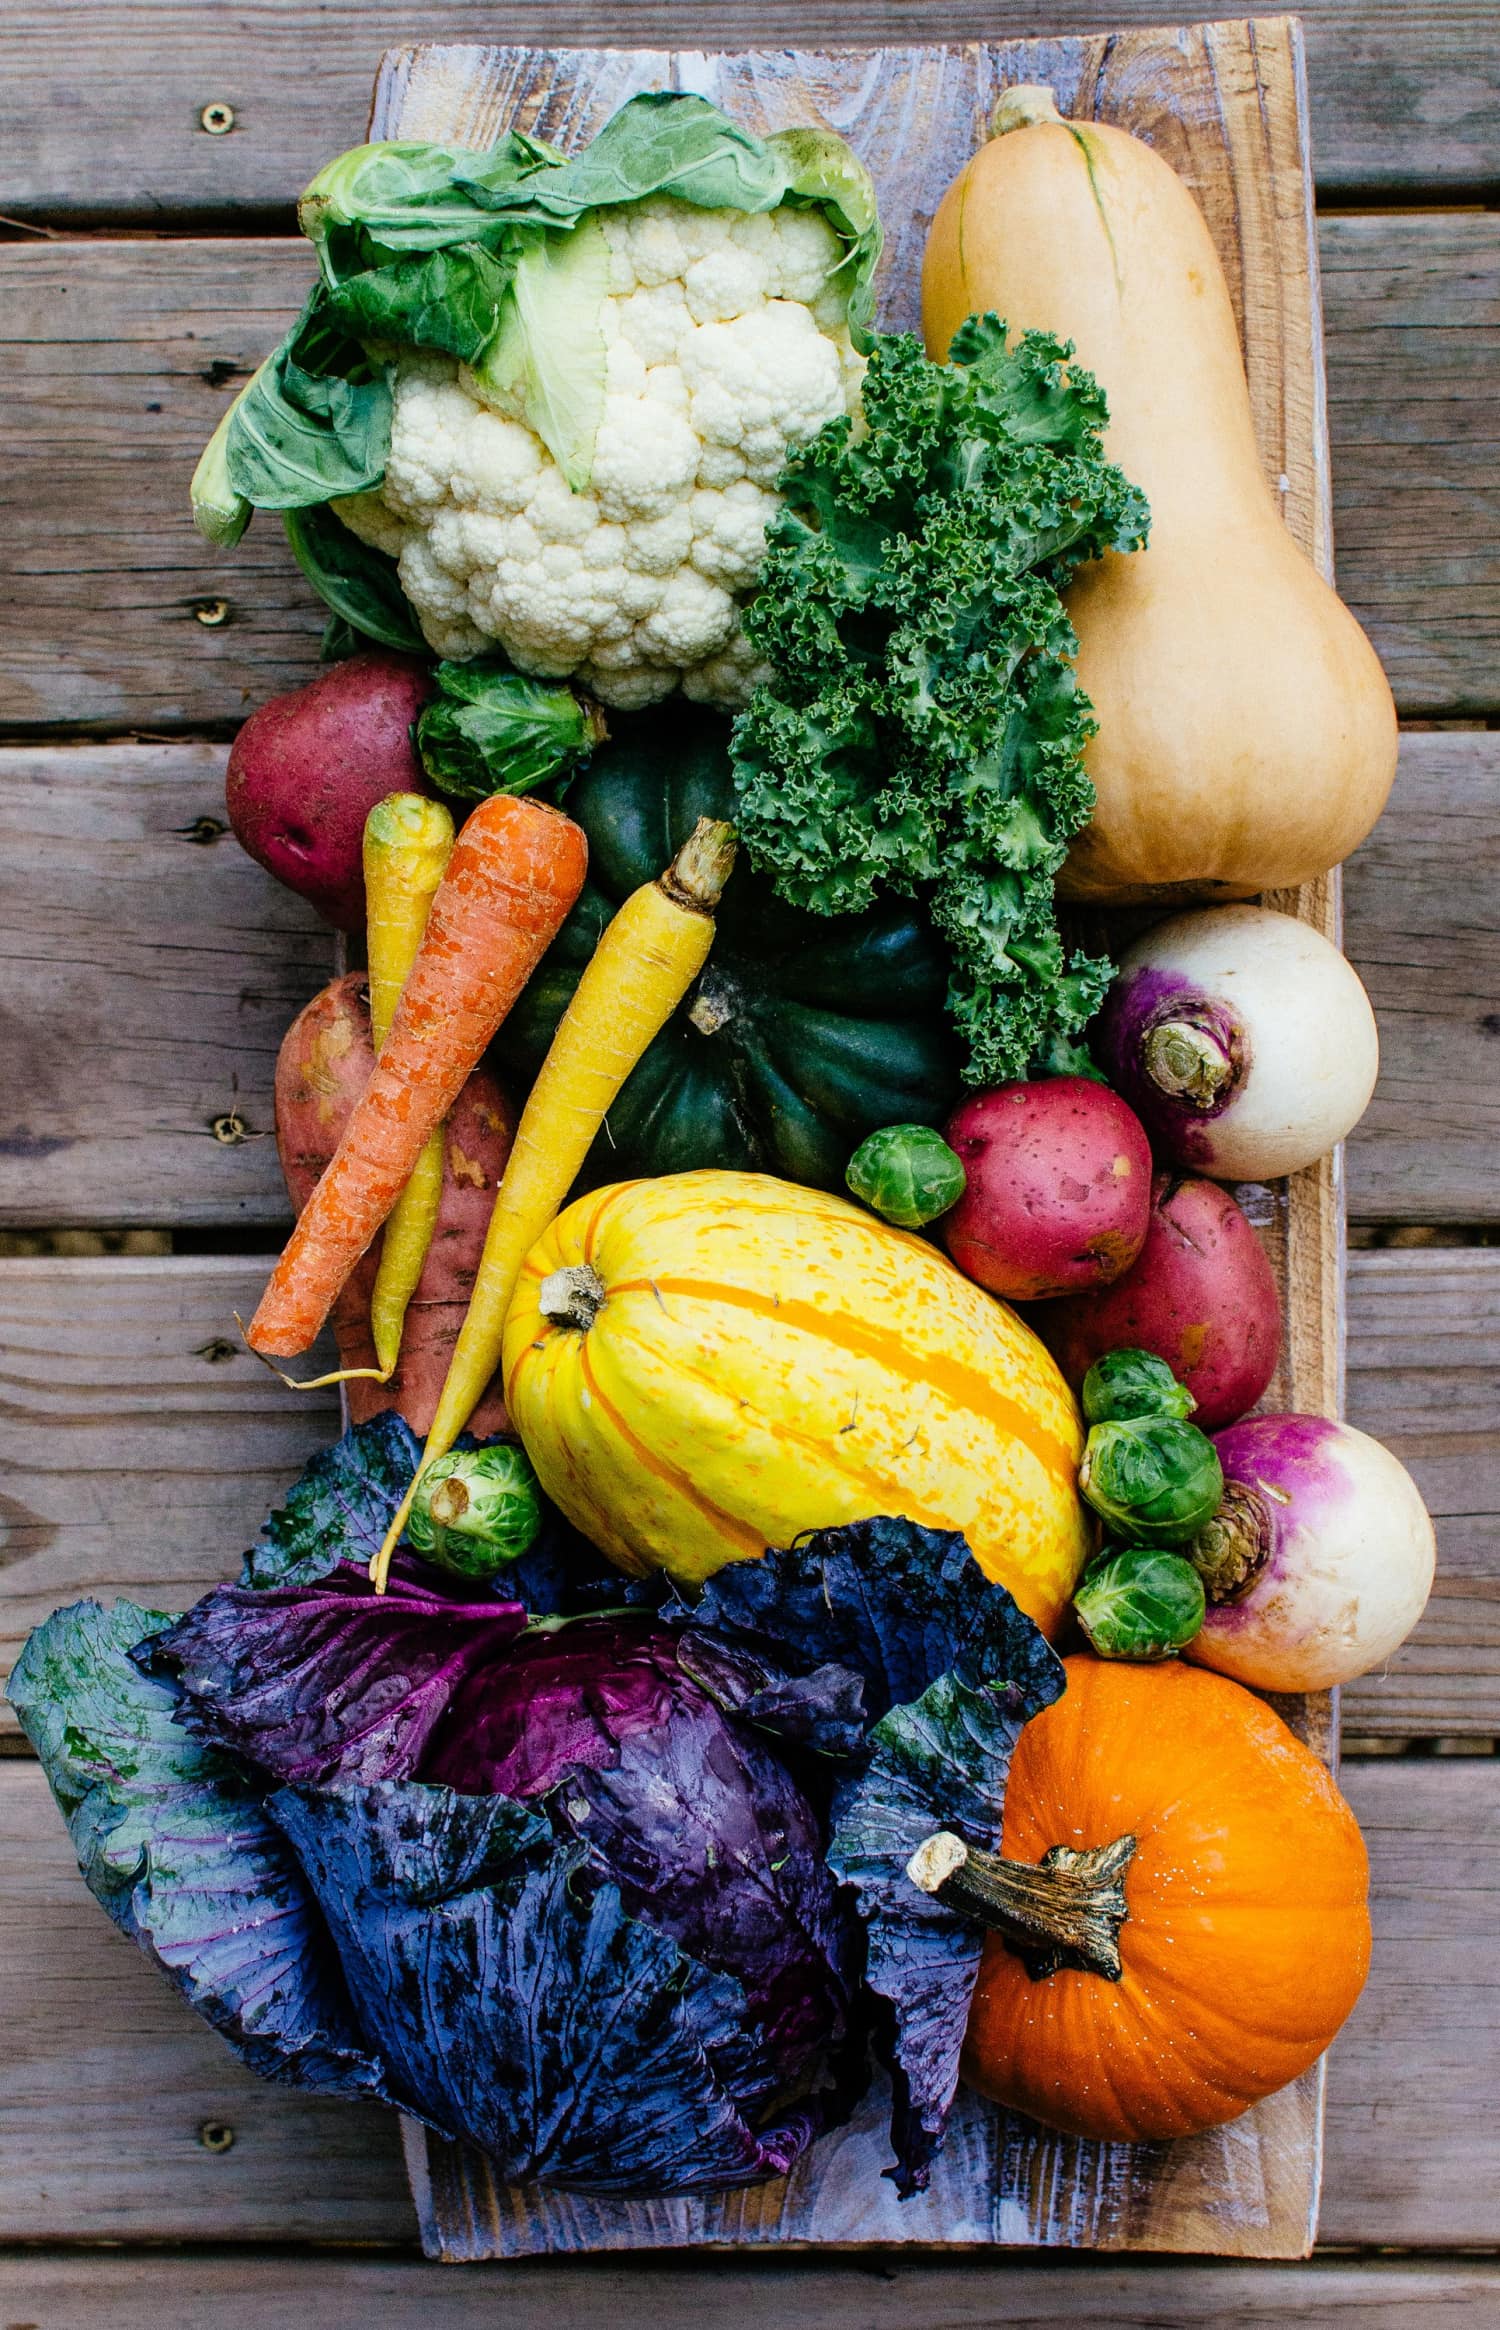 12 Fall Vegetables You Should Know How to Cook | Kitchn